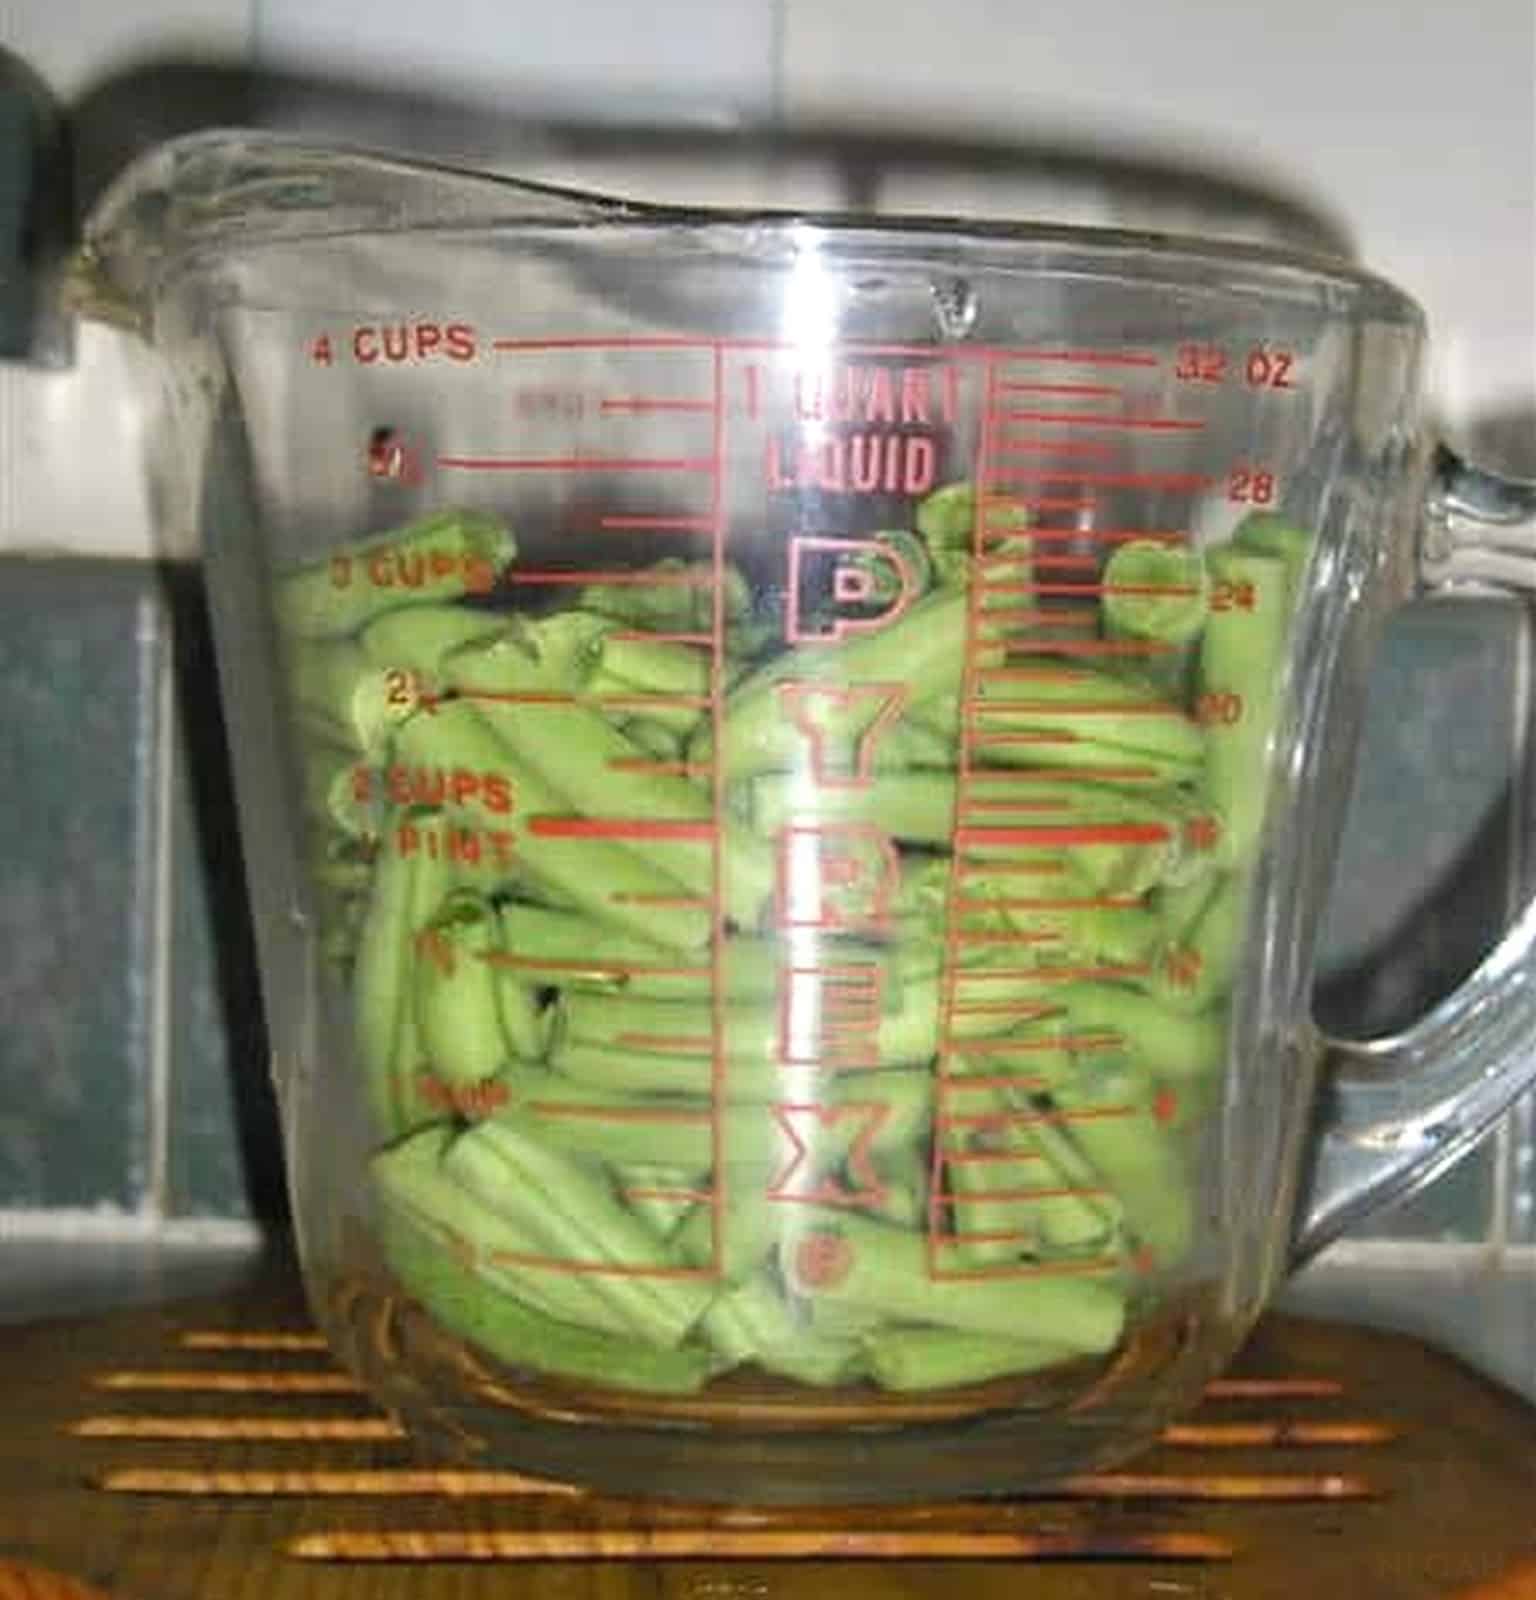 3 cups of green beans in a measuring cup